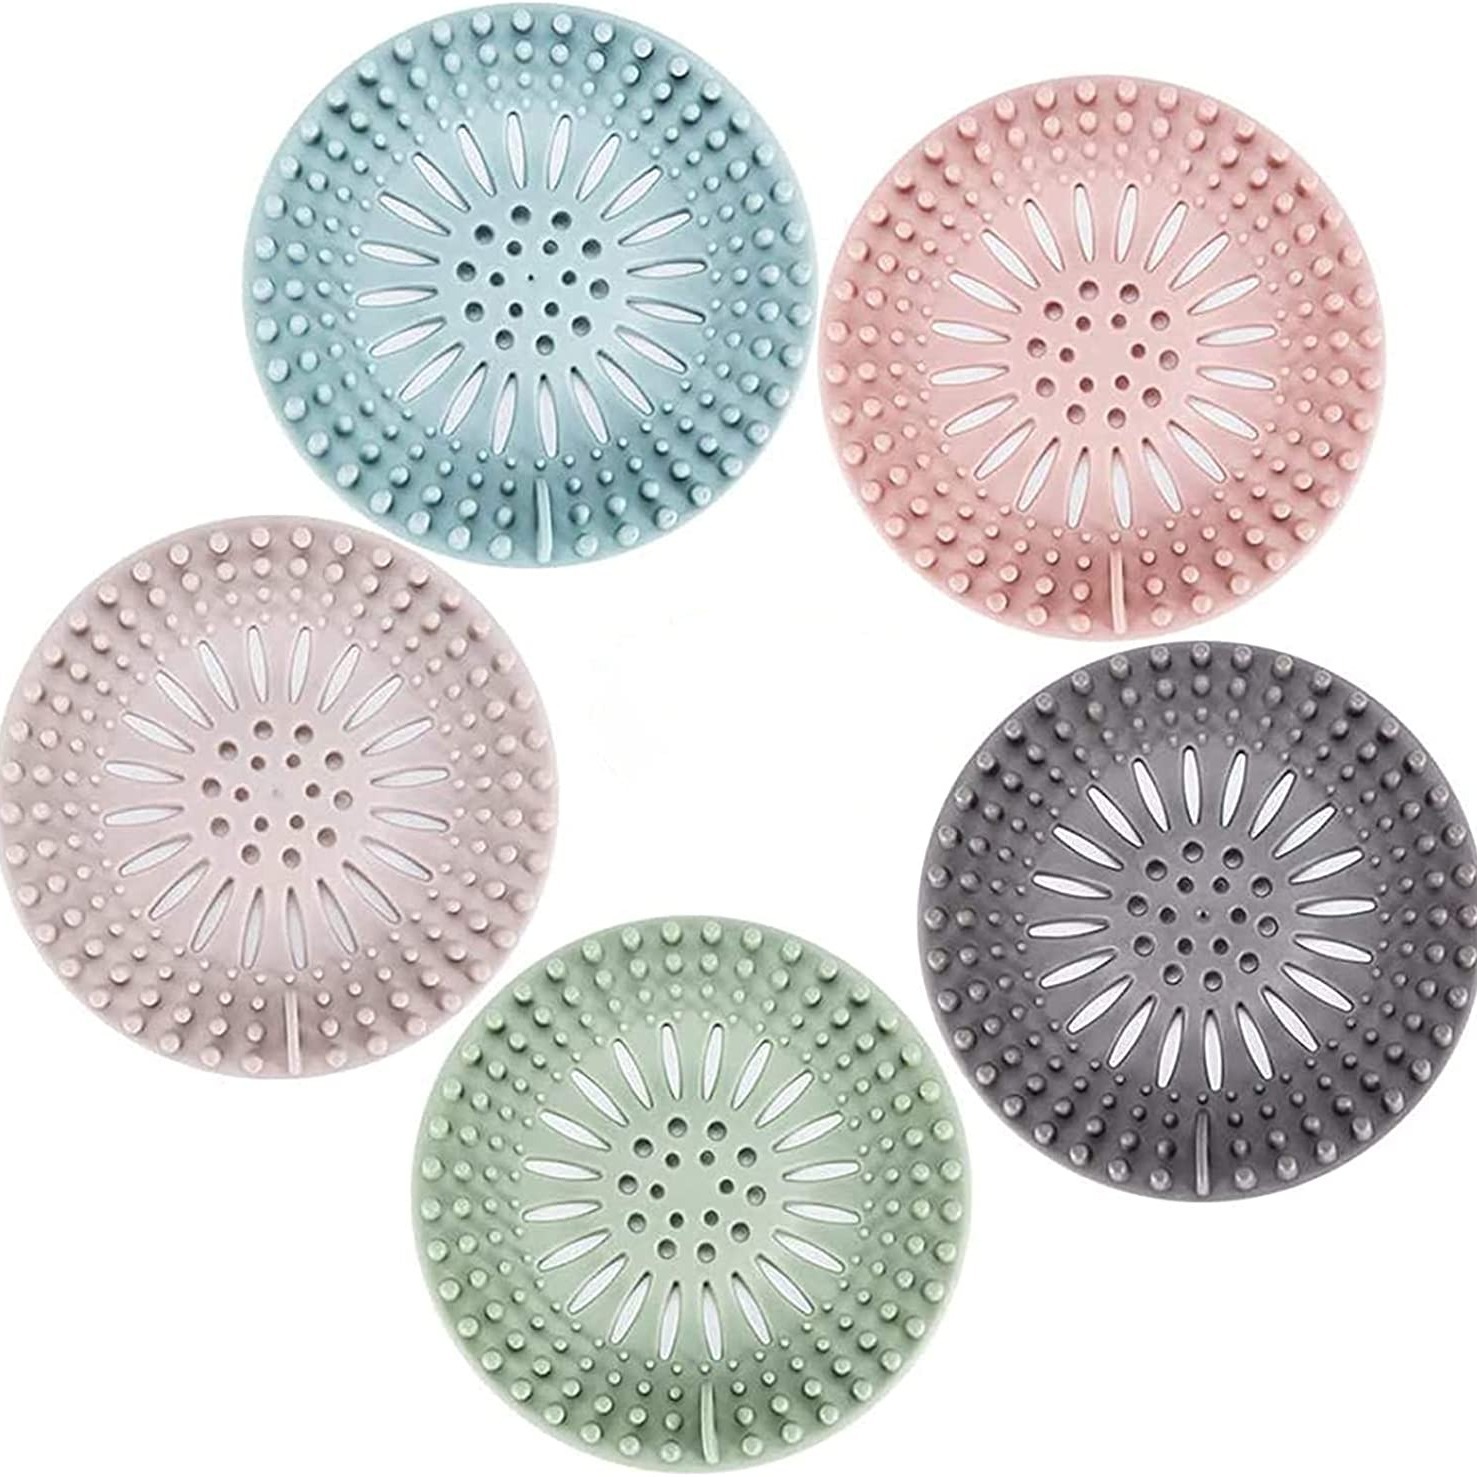 https://img.kwcdn.com/product/durable-silicone-hair-stopper/d69d2f15w98k18-a232108d/1d14c6c14cc/cd52515e-5490-4d2f-b96f-95c44836106b_1477x1477.jpeg?imageView2/2/w/500/q/60/format/webp